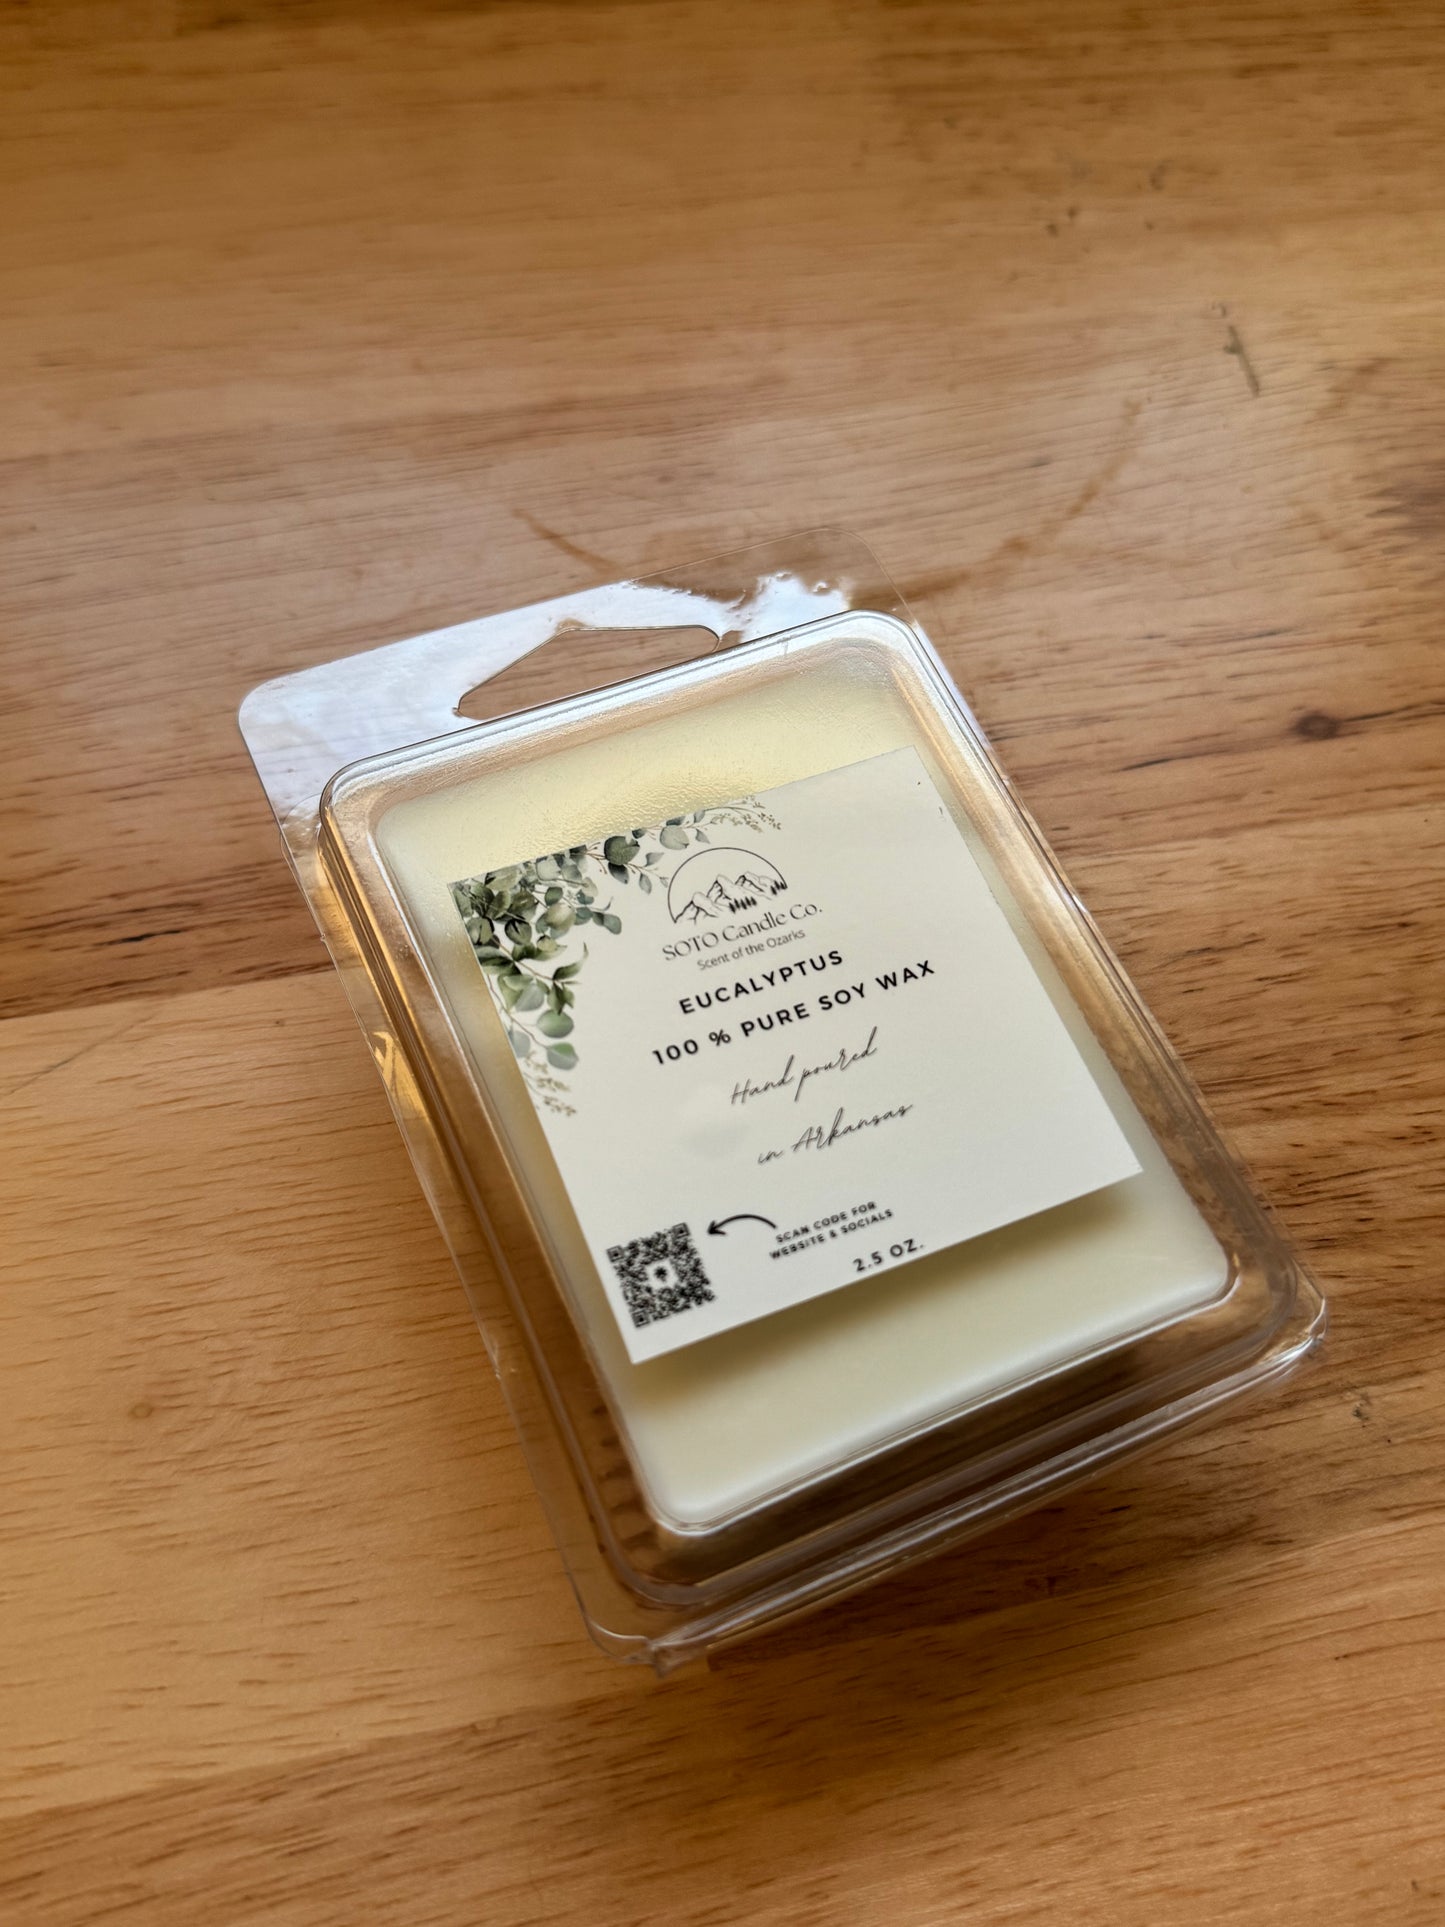 SOTO Candle Co Pure Soy Wax Melts All natural and Non Toxic